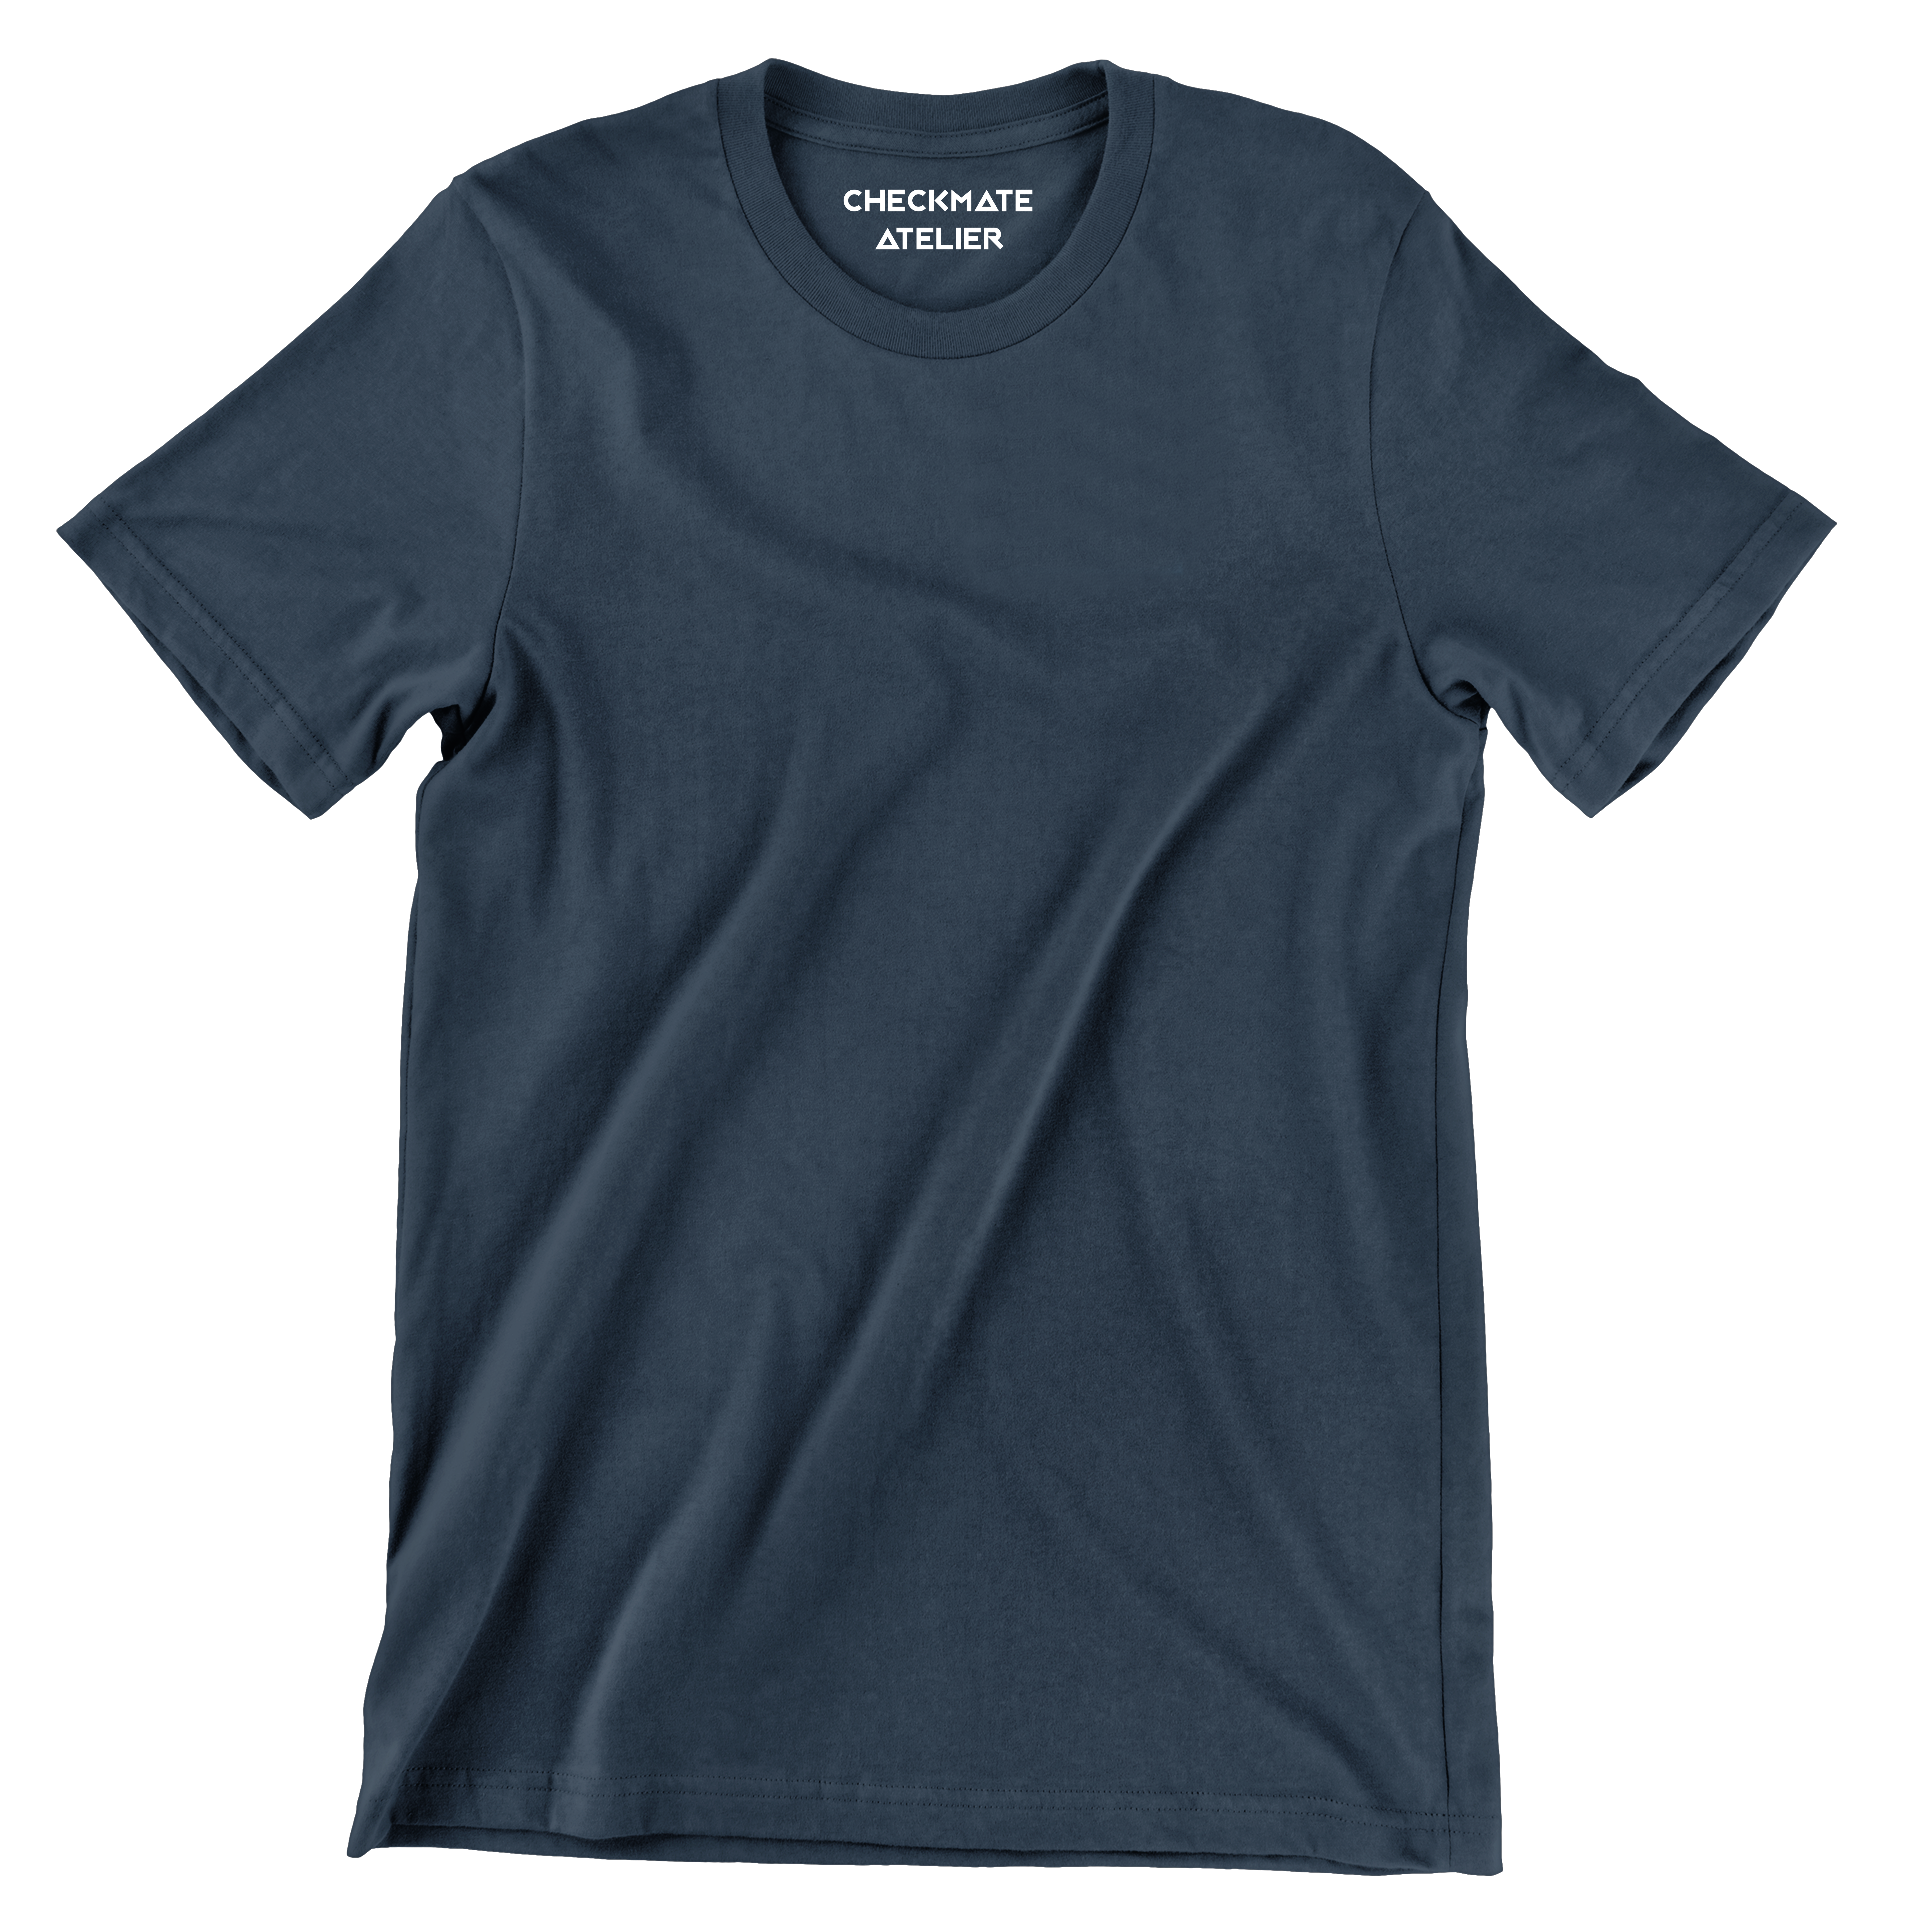 Navy Blue Round Neck T-Shirt - Shop Now - Checkmate Atelier